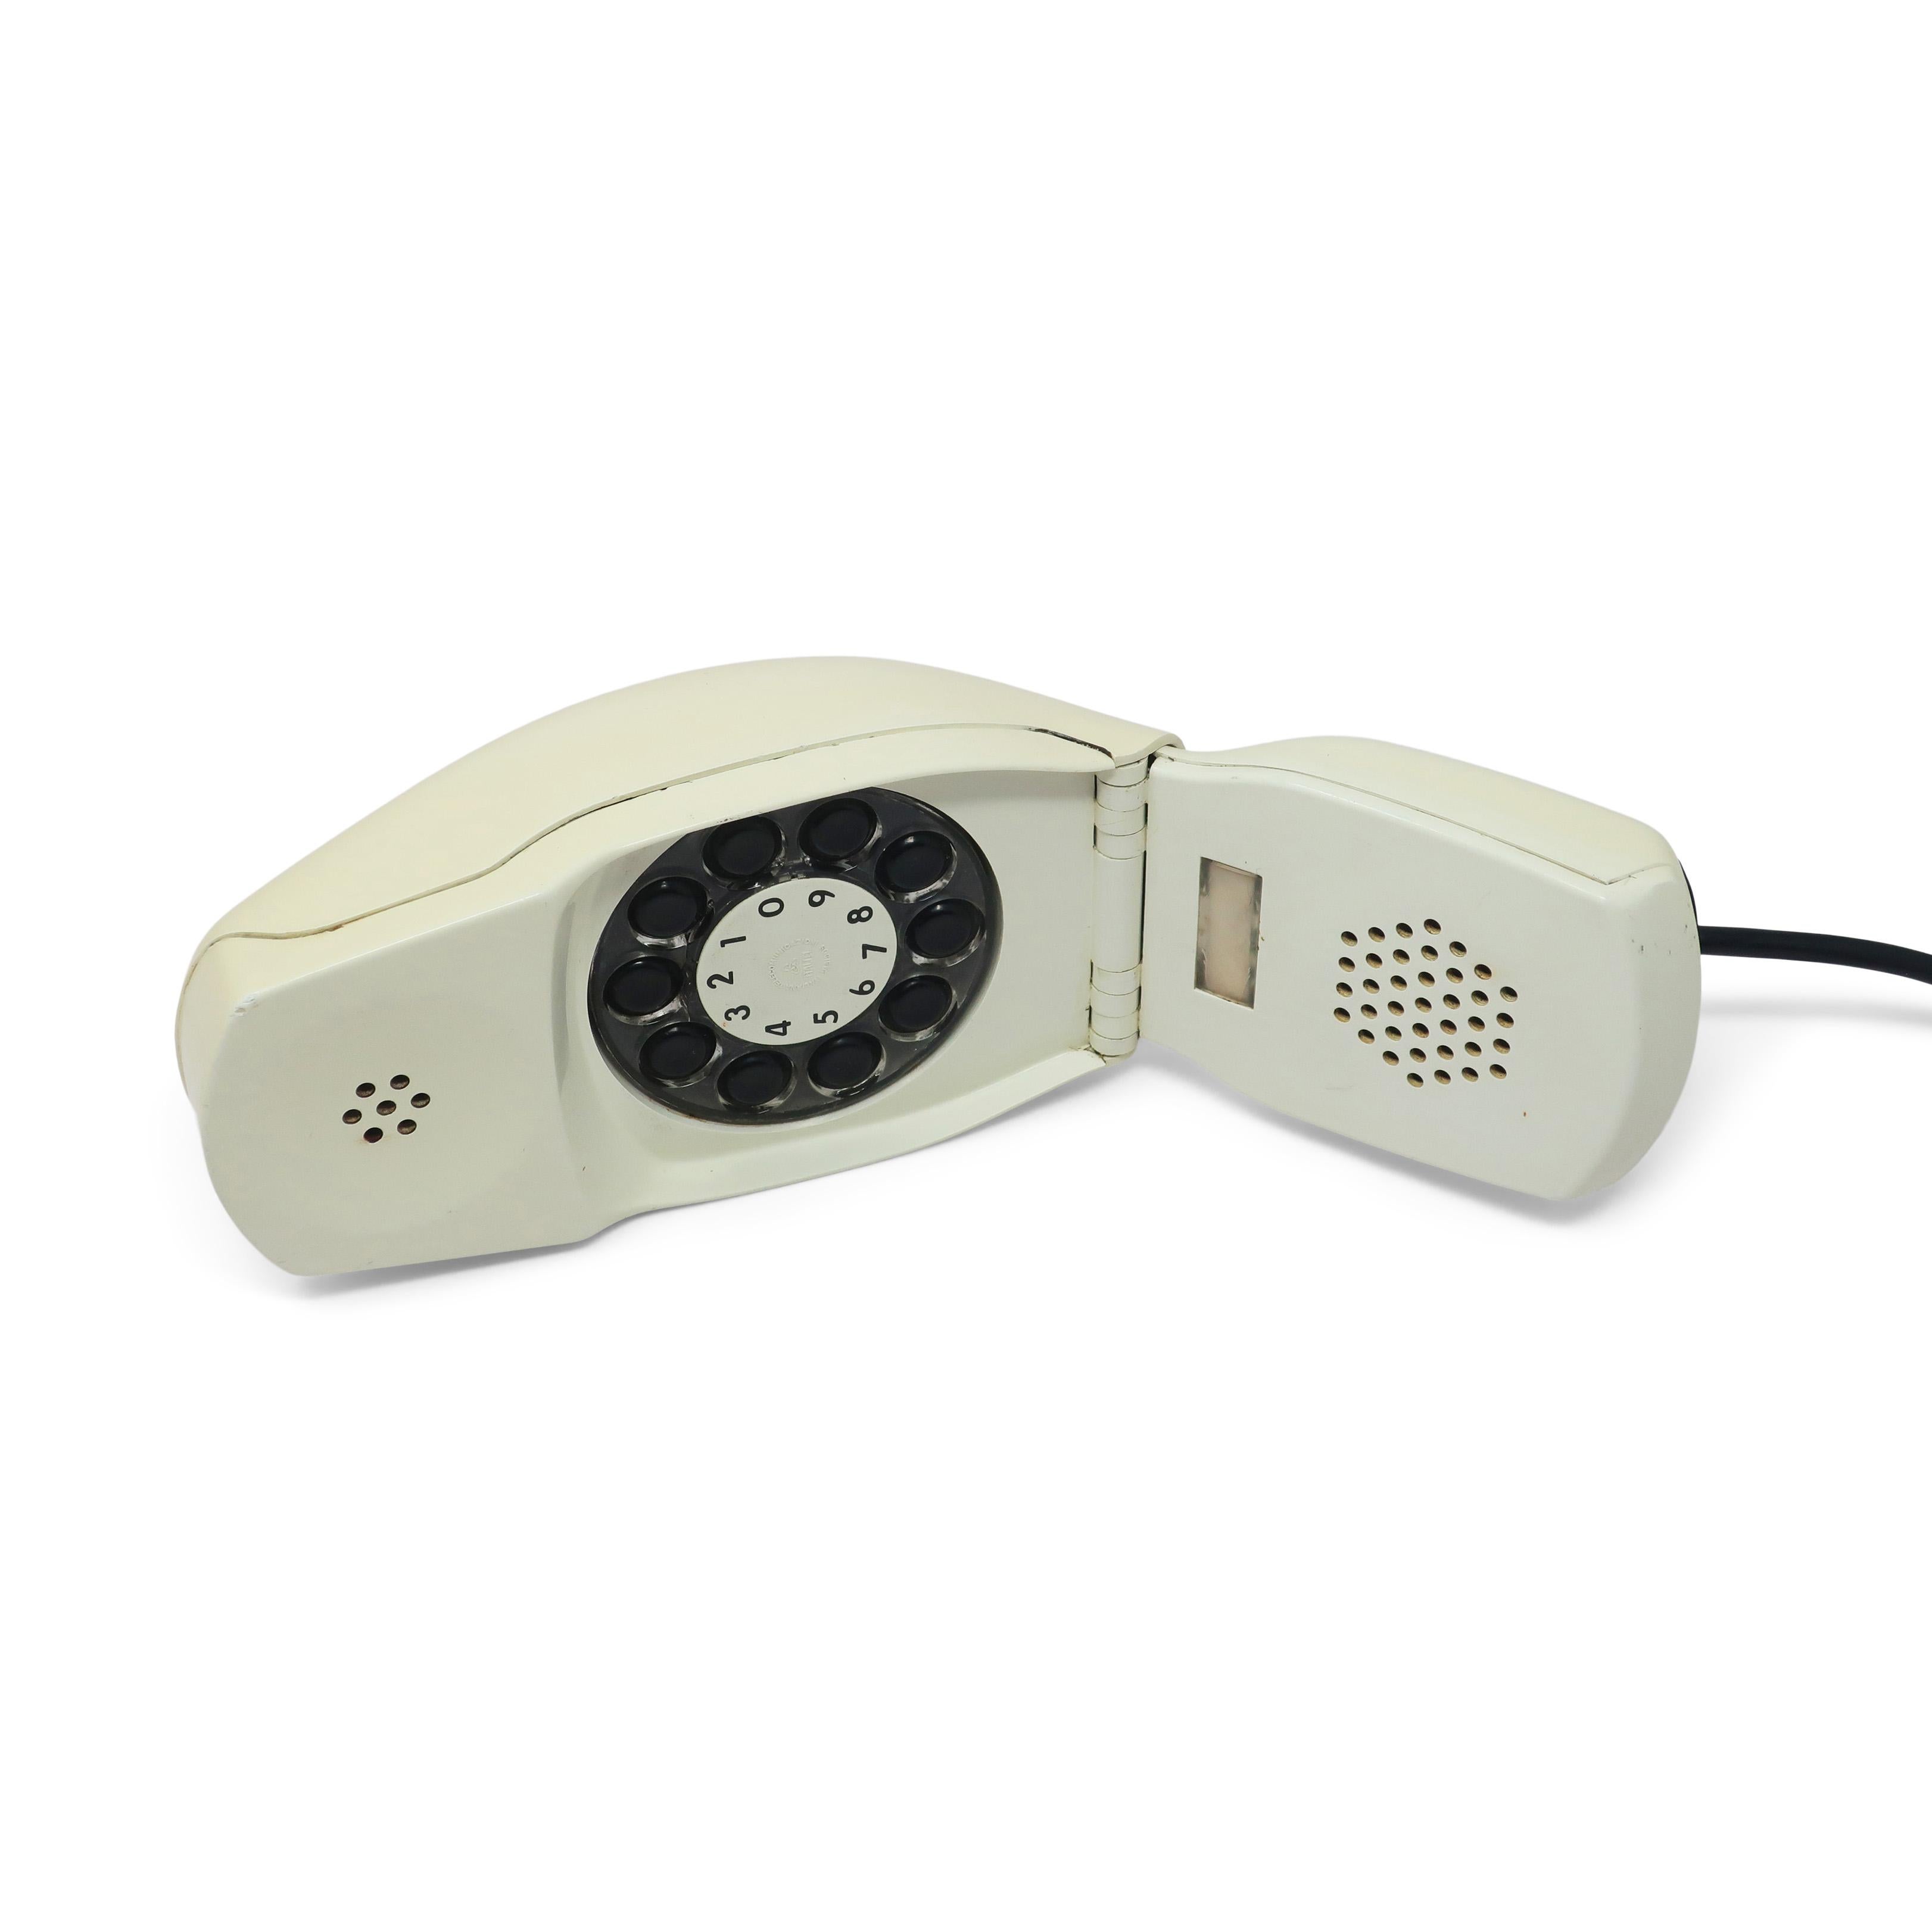 An off-white Grillo (Cricket) folding telephone by Marco Zanuso and Richard Sapper designed in 1966.  A revolutionary space age modern design with an ingenious flip mechanism and a low-profile that resembles a computer mouse.  Can be found in the